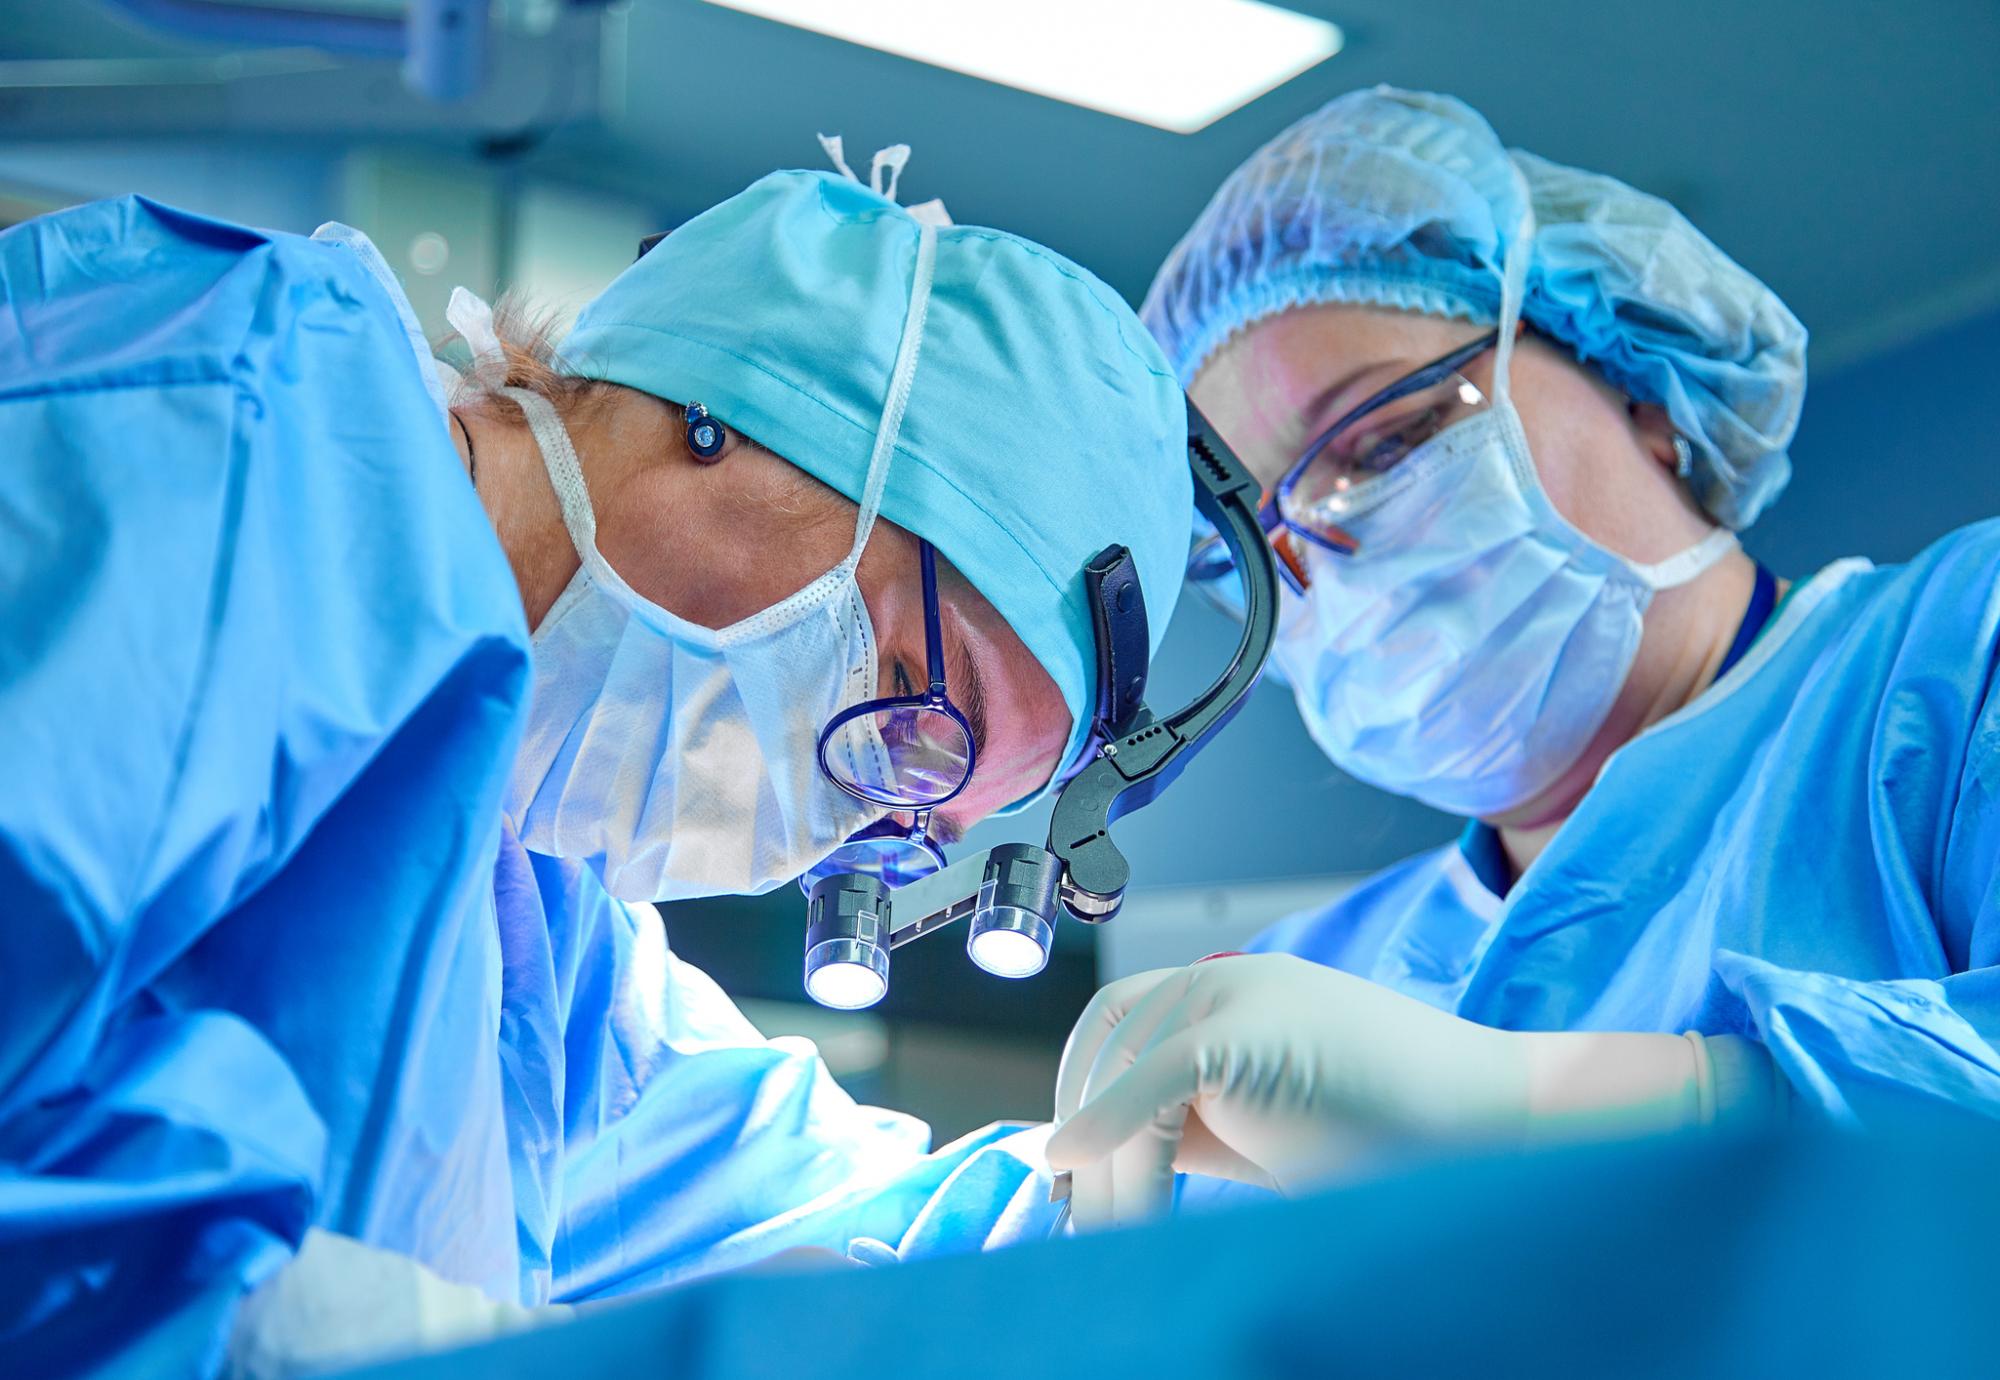 Two surgeons performing a procedure